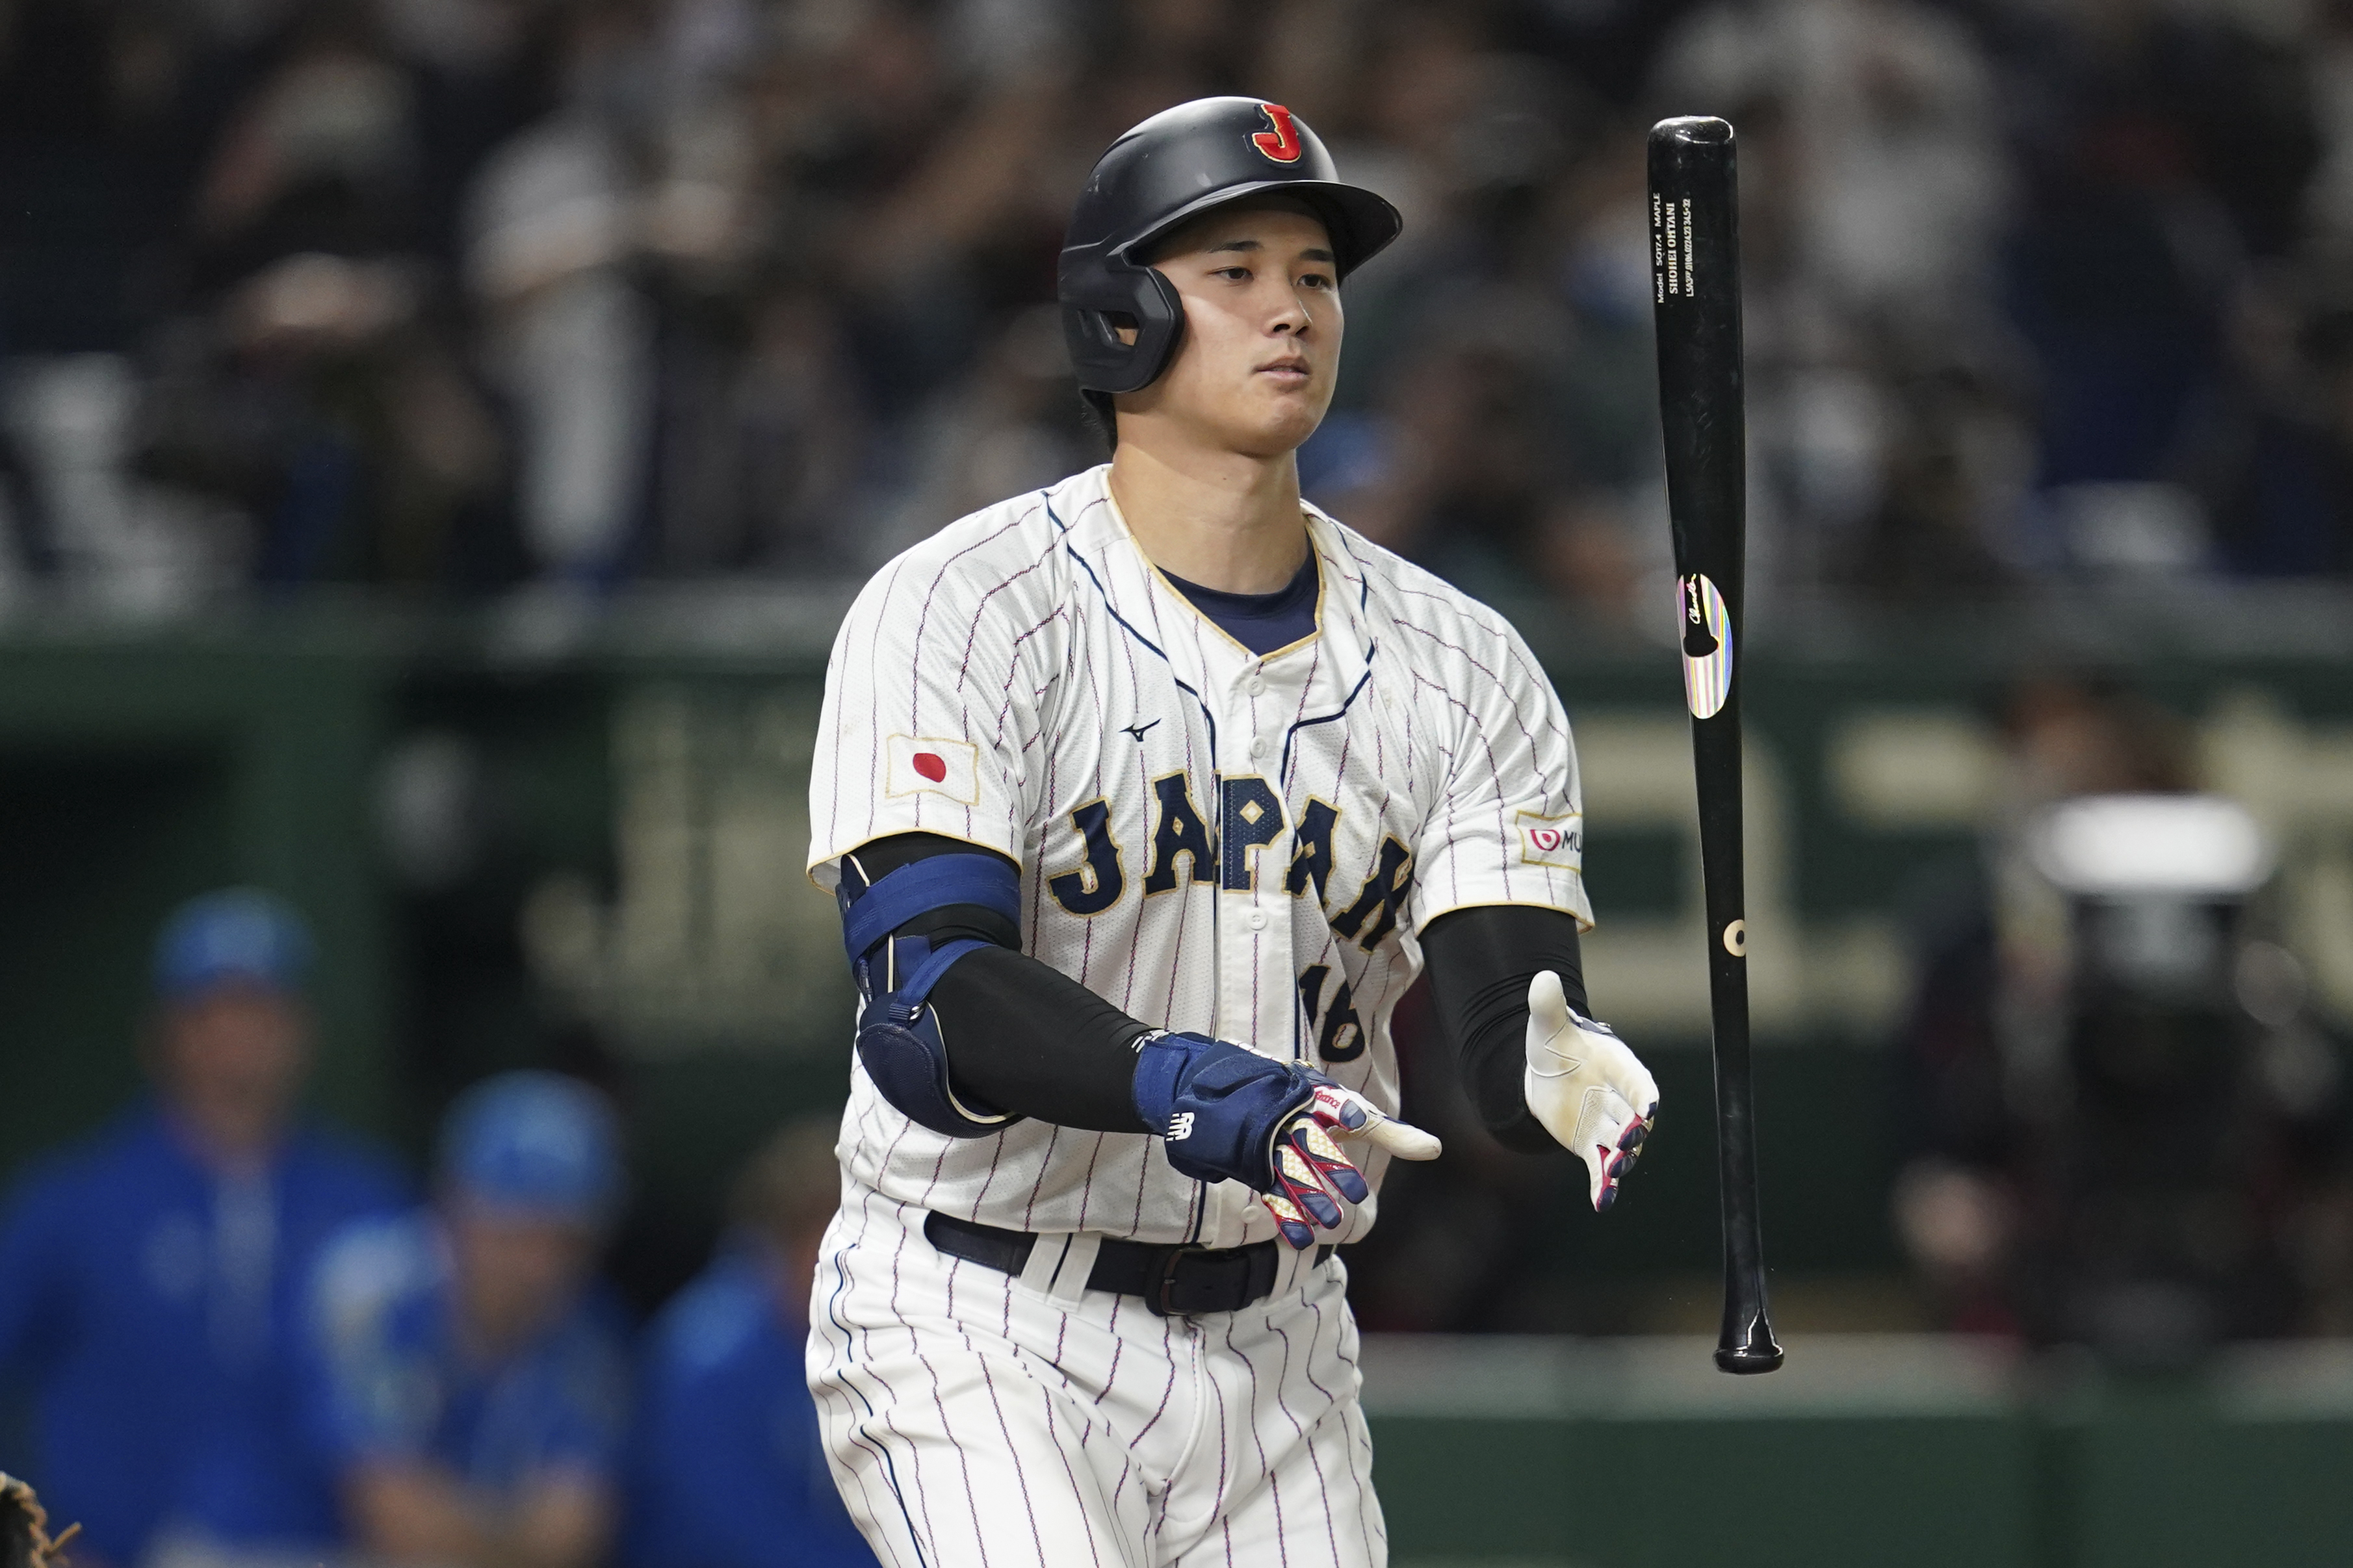 Ohtani leads Japan over Italy 9-3, into WBC semifinals